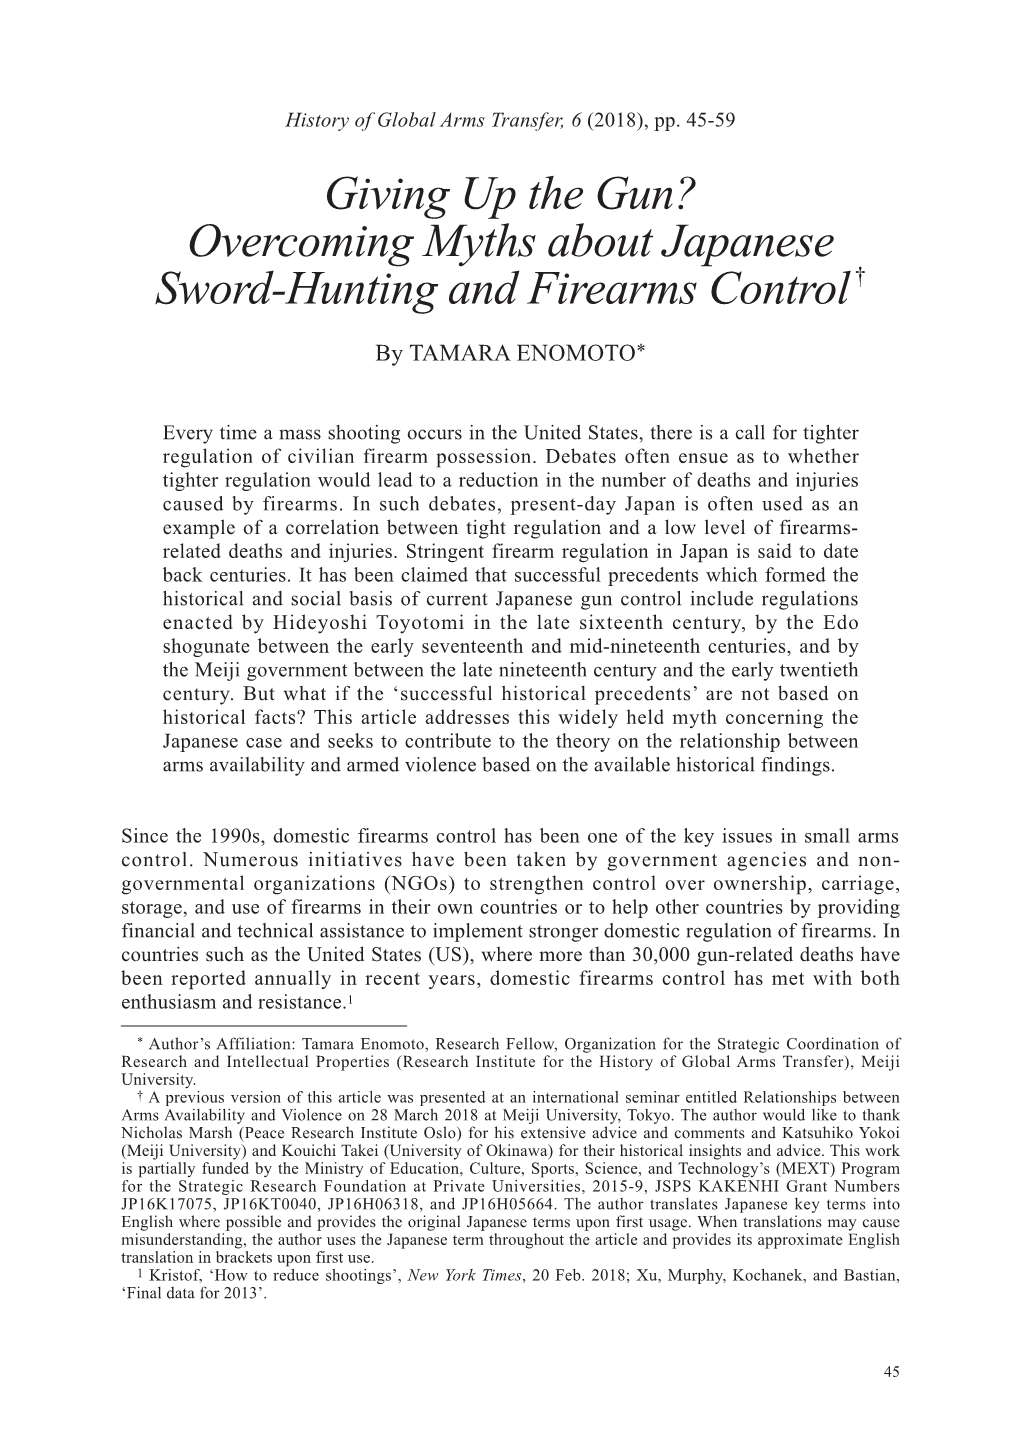 Giving up the Gun? Overcoming Myths About Japanese Sword-Hunting and Firearms Control †